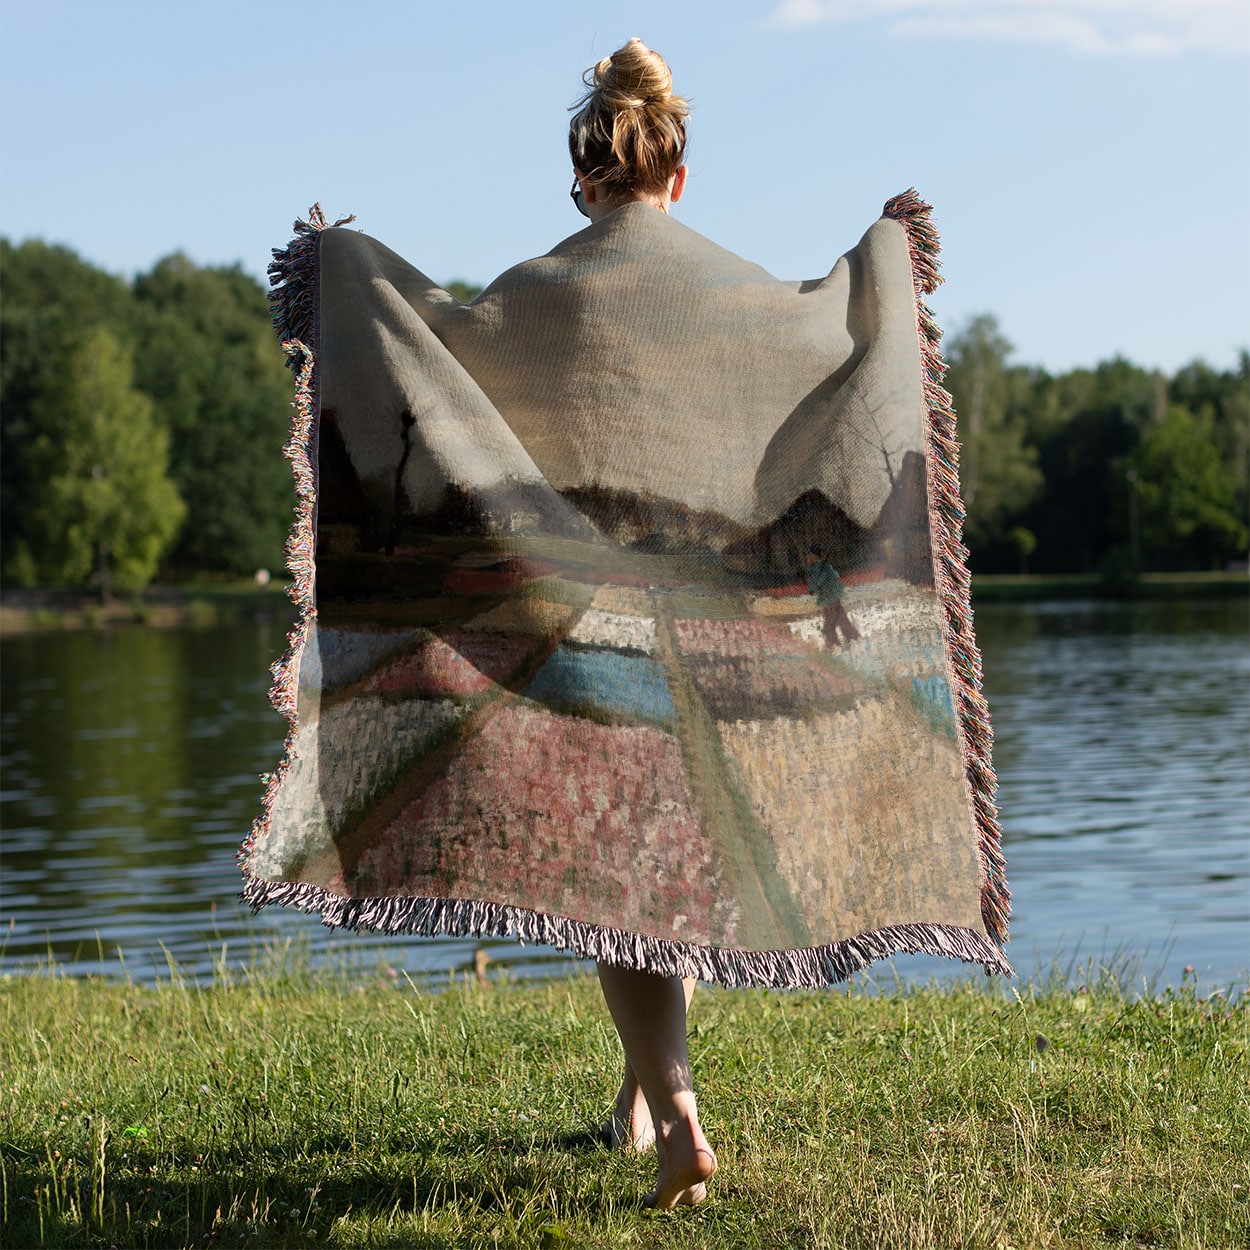 Floral Landscape Woven Blanket Held on a Woman's Back Outside